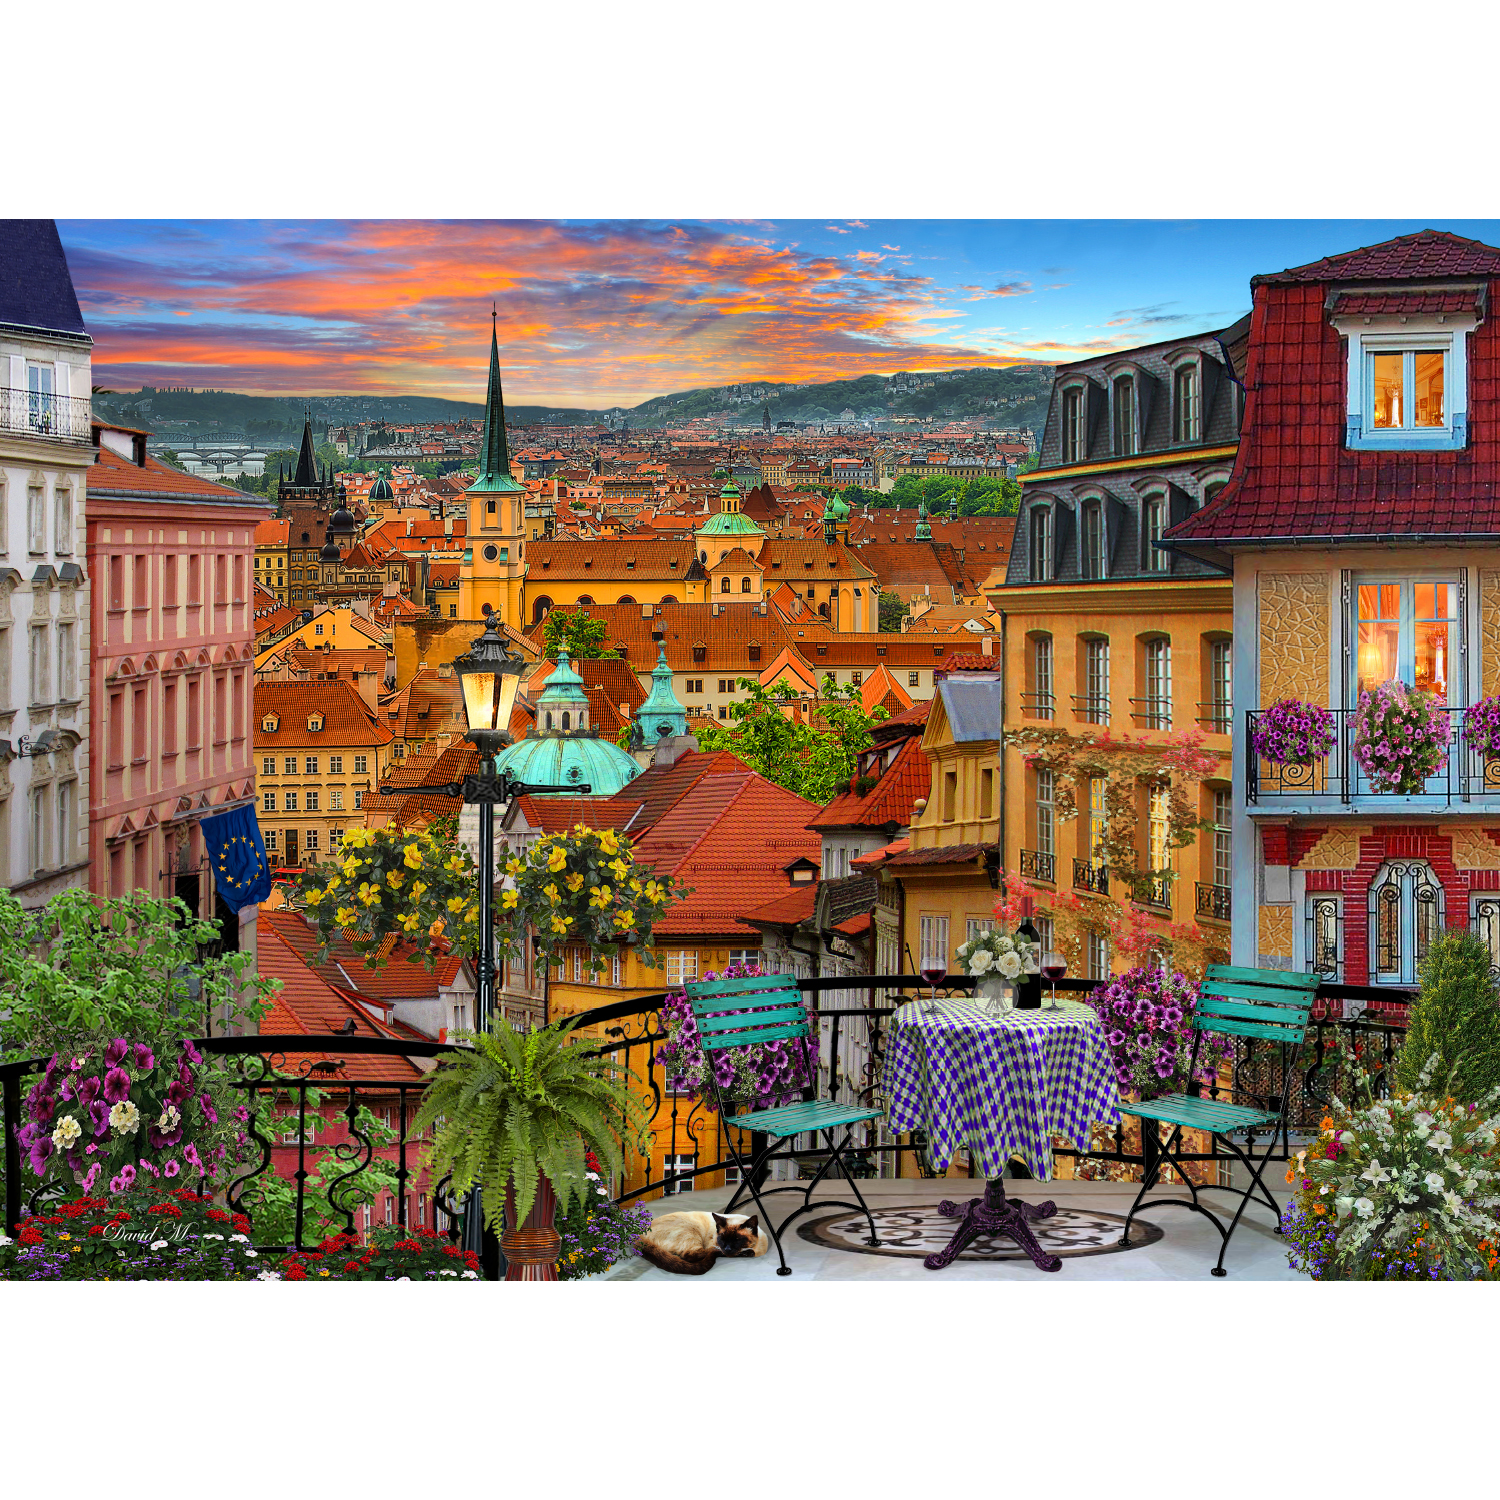 1000pc puzzle of a European dinner view of the city